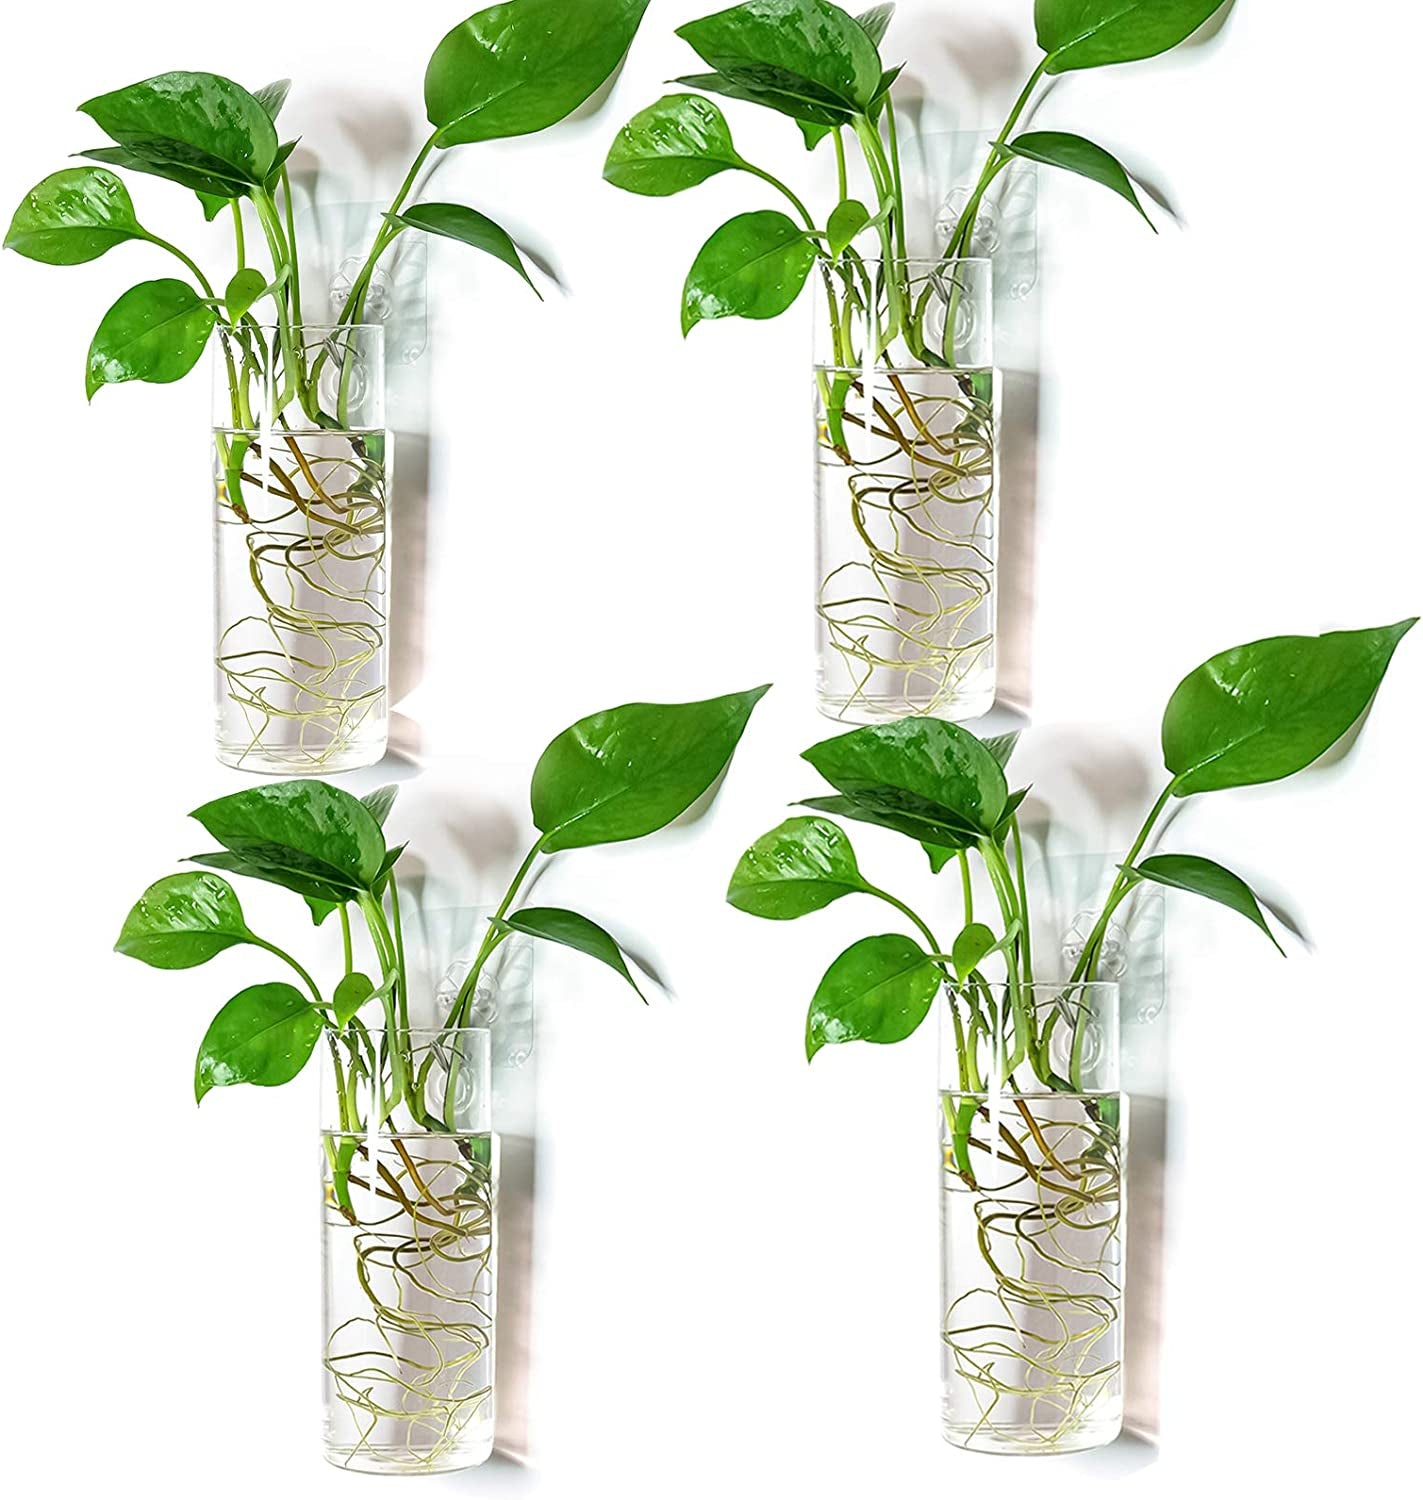 Kingbuy, Kingbuy Wall Hanging Glass Plant Terrarium Container Cylinder Shape.2Pcs Planter Air Decorations for Home Decor